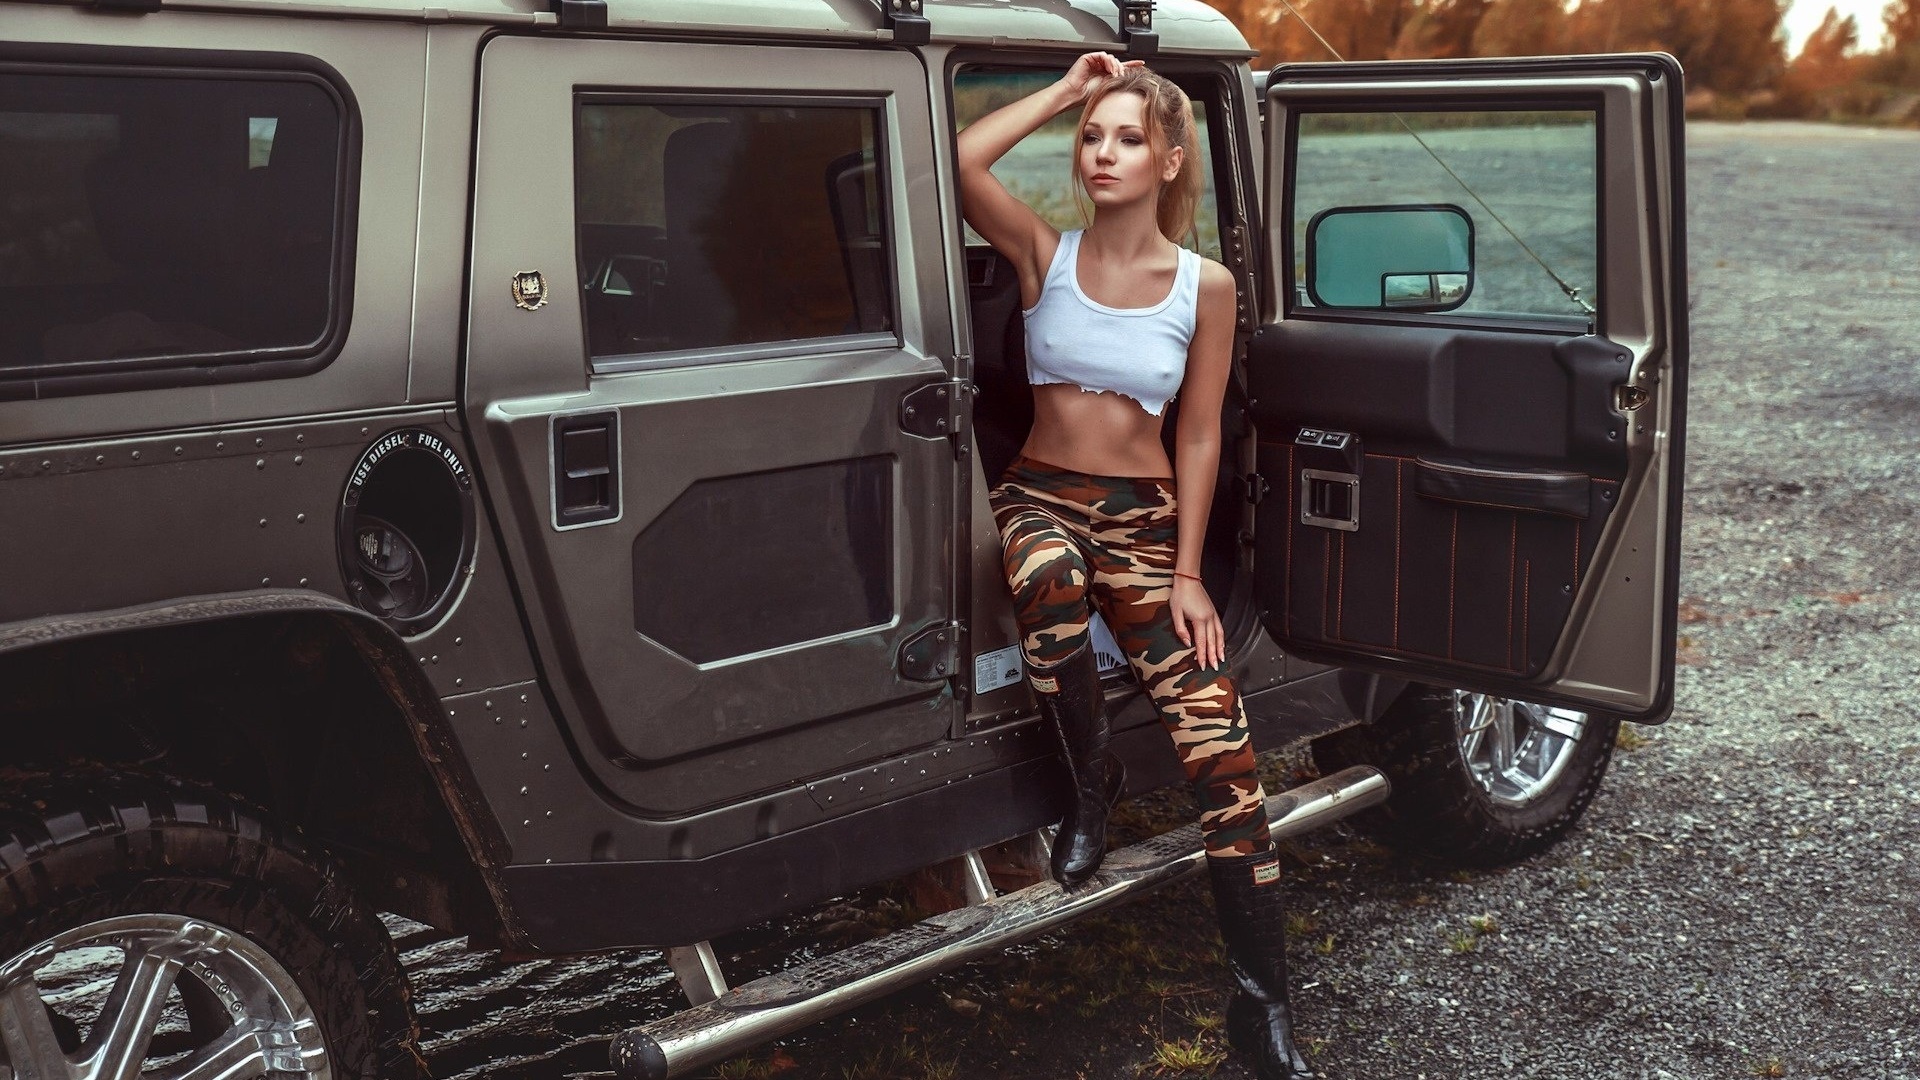 women, blonde, women with cars, belly, brunette, tank top, women outdoors, boots, nipple through clothing, armpits, looking away